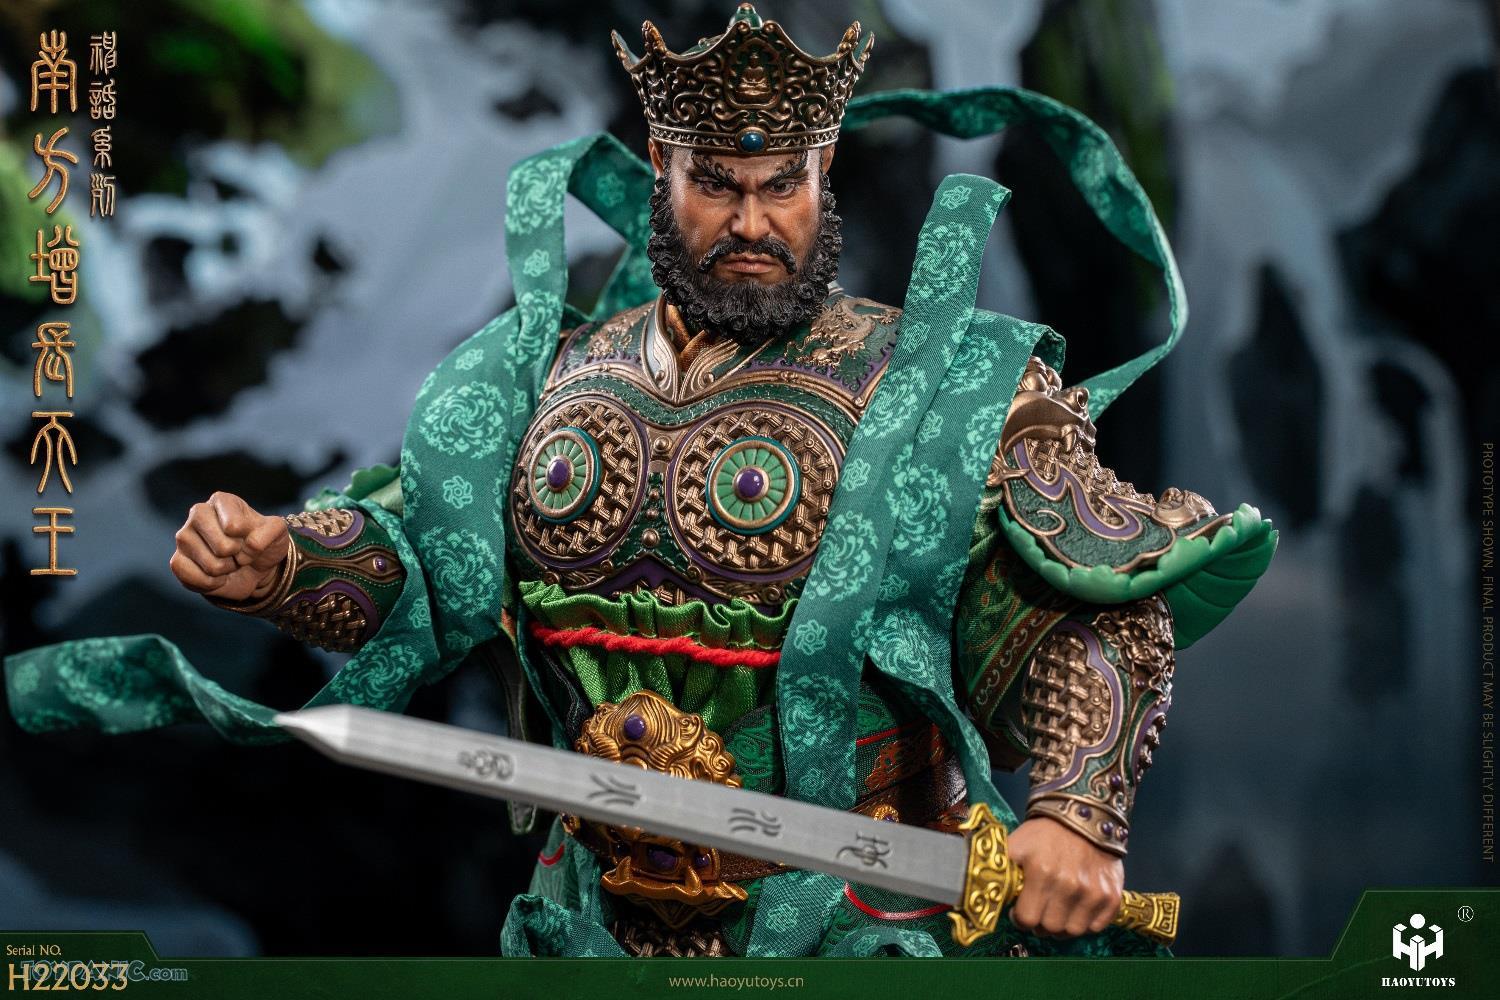 male - NEW PRODUCT: HaoYuToys 1/6 Myth Series Southern Growth King 212202451839PM_1277904